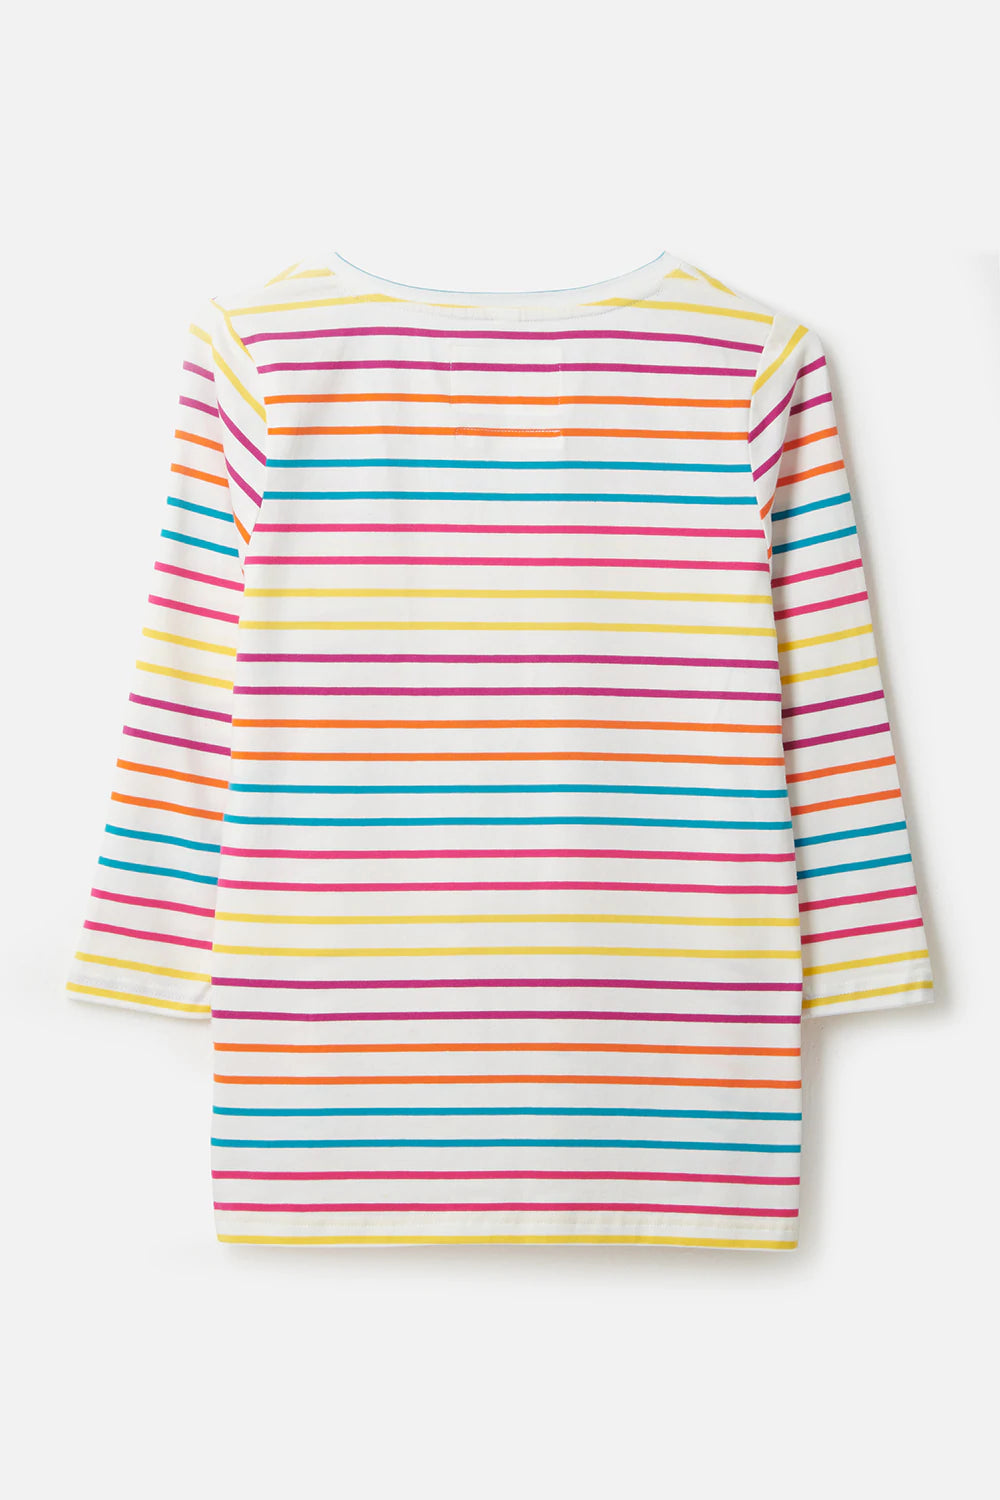 Lighthouse Ariana in Teal Pink Orange Stripe with 3/4 Length Sleeve Top